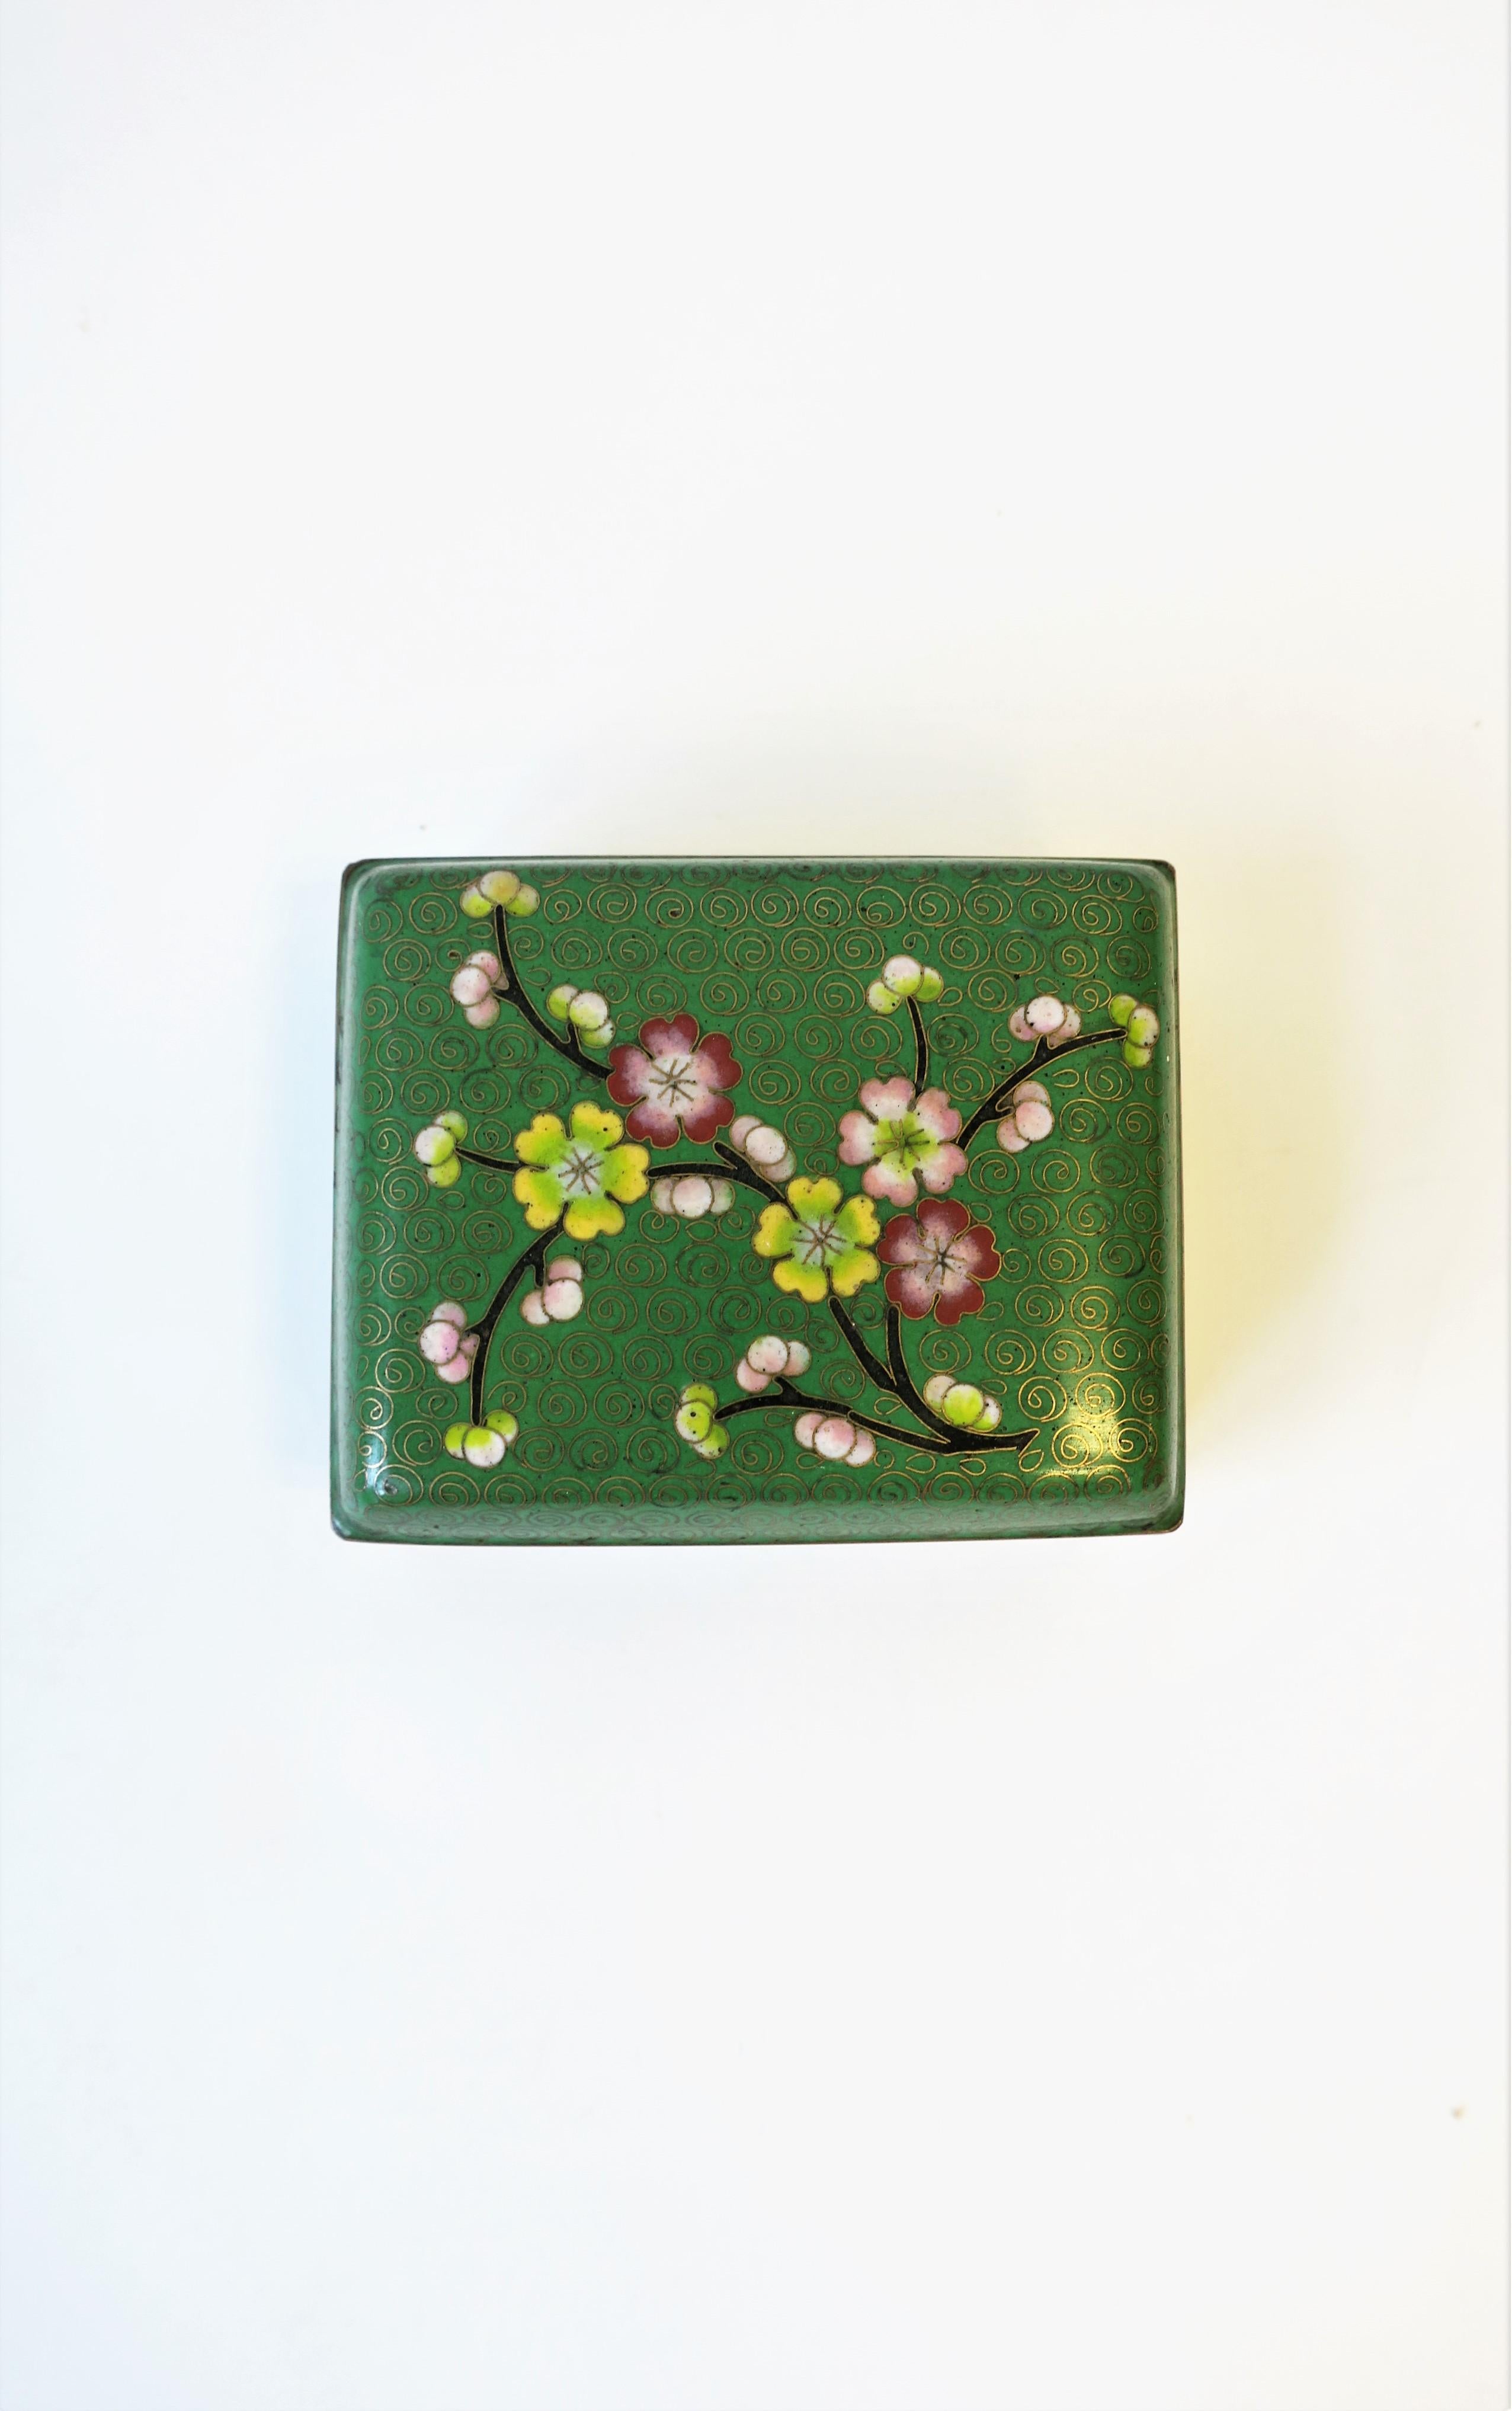 An enamel cloisonné and brass jewelry box with cherry blossom design, circa late-20th century. Box is great for jewelry or small items on a vanity, desk, nightstand table, etc. Colors include green, light green, gold, brass yellow, pink, red